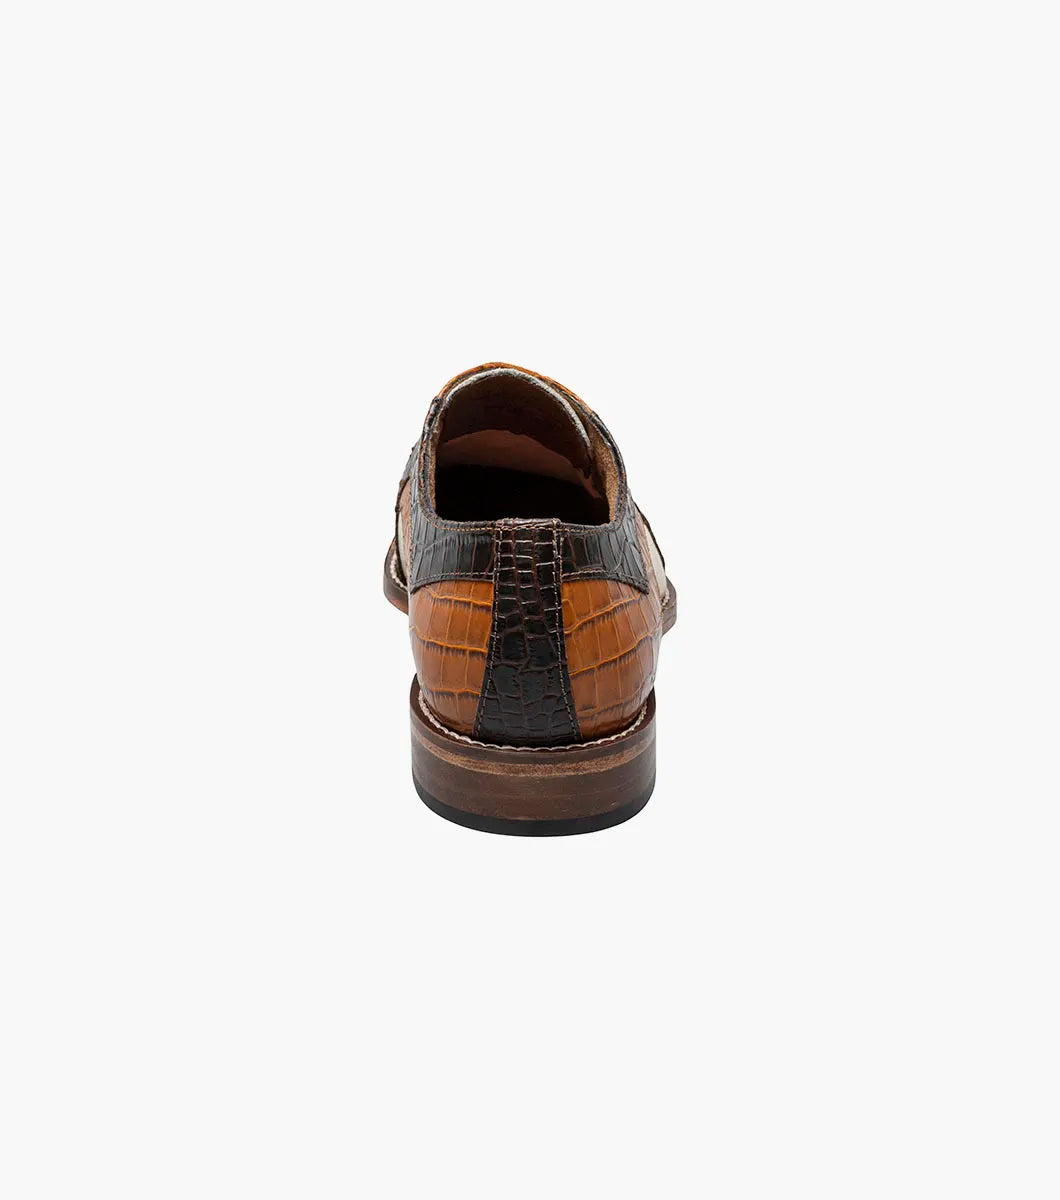 Stacy Adams Dress Shoes - Turano